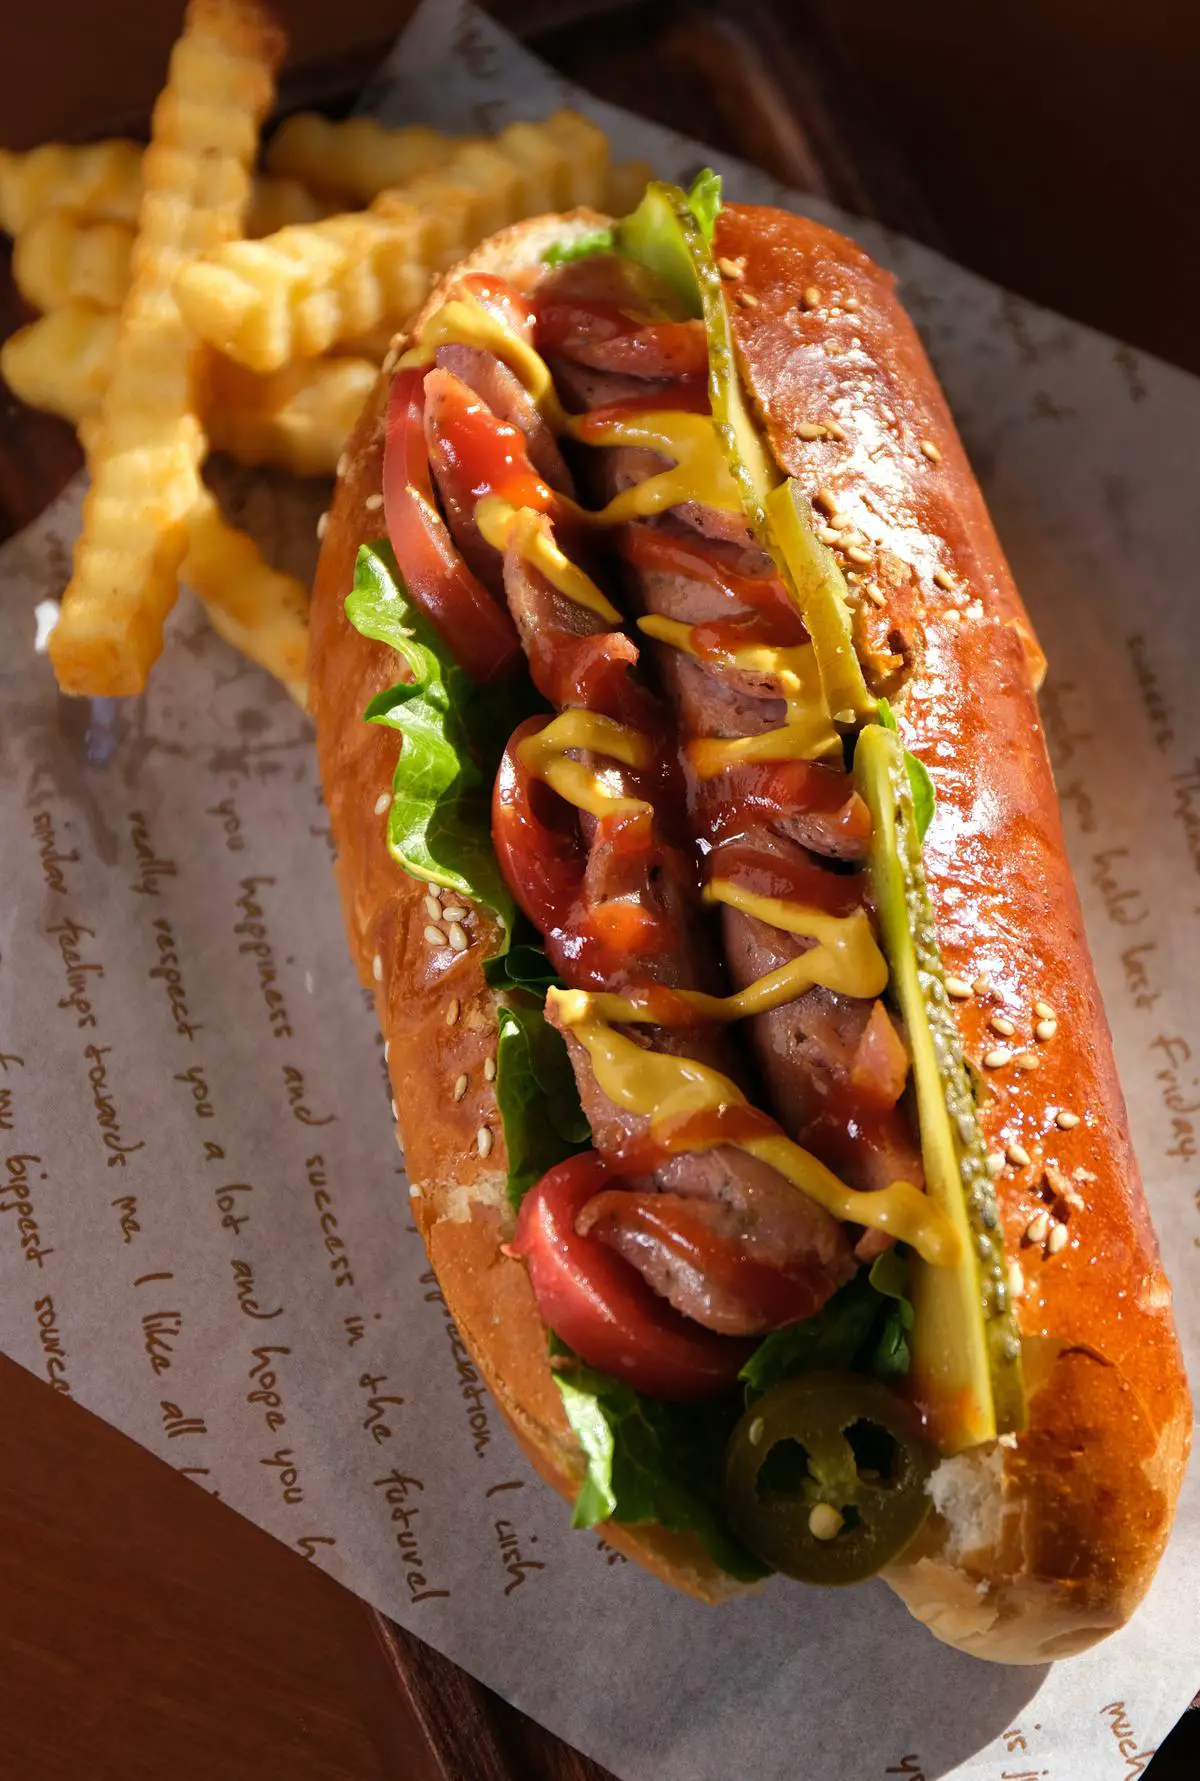 A close-up image of a Costco hot dog on a bun with ketchup and mustard.